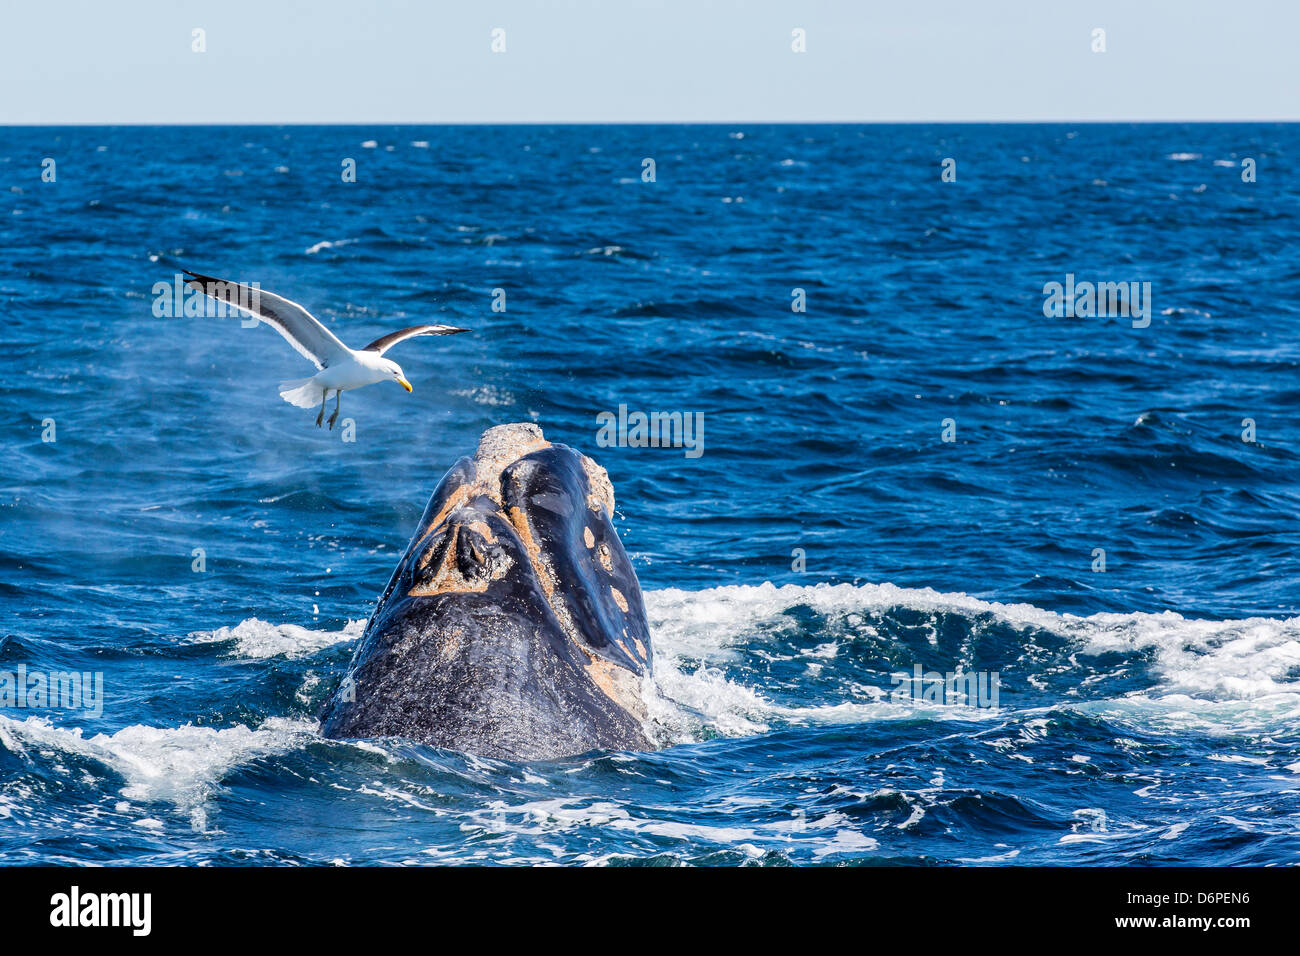 Southern right whale (Eubalaena australis) calf being fed upon by kelp gull, Golfo Nuevo, Peninsula Valdes, Argentina Stock Photo